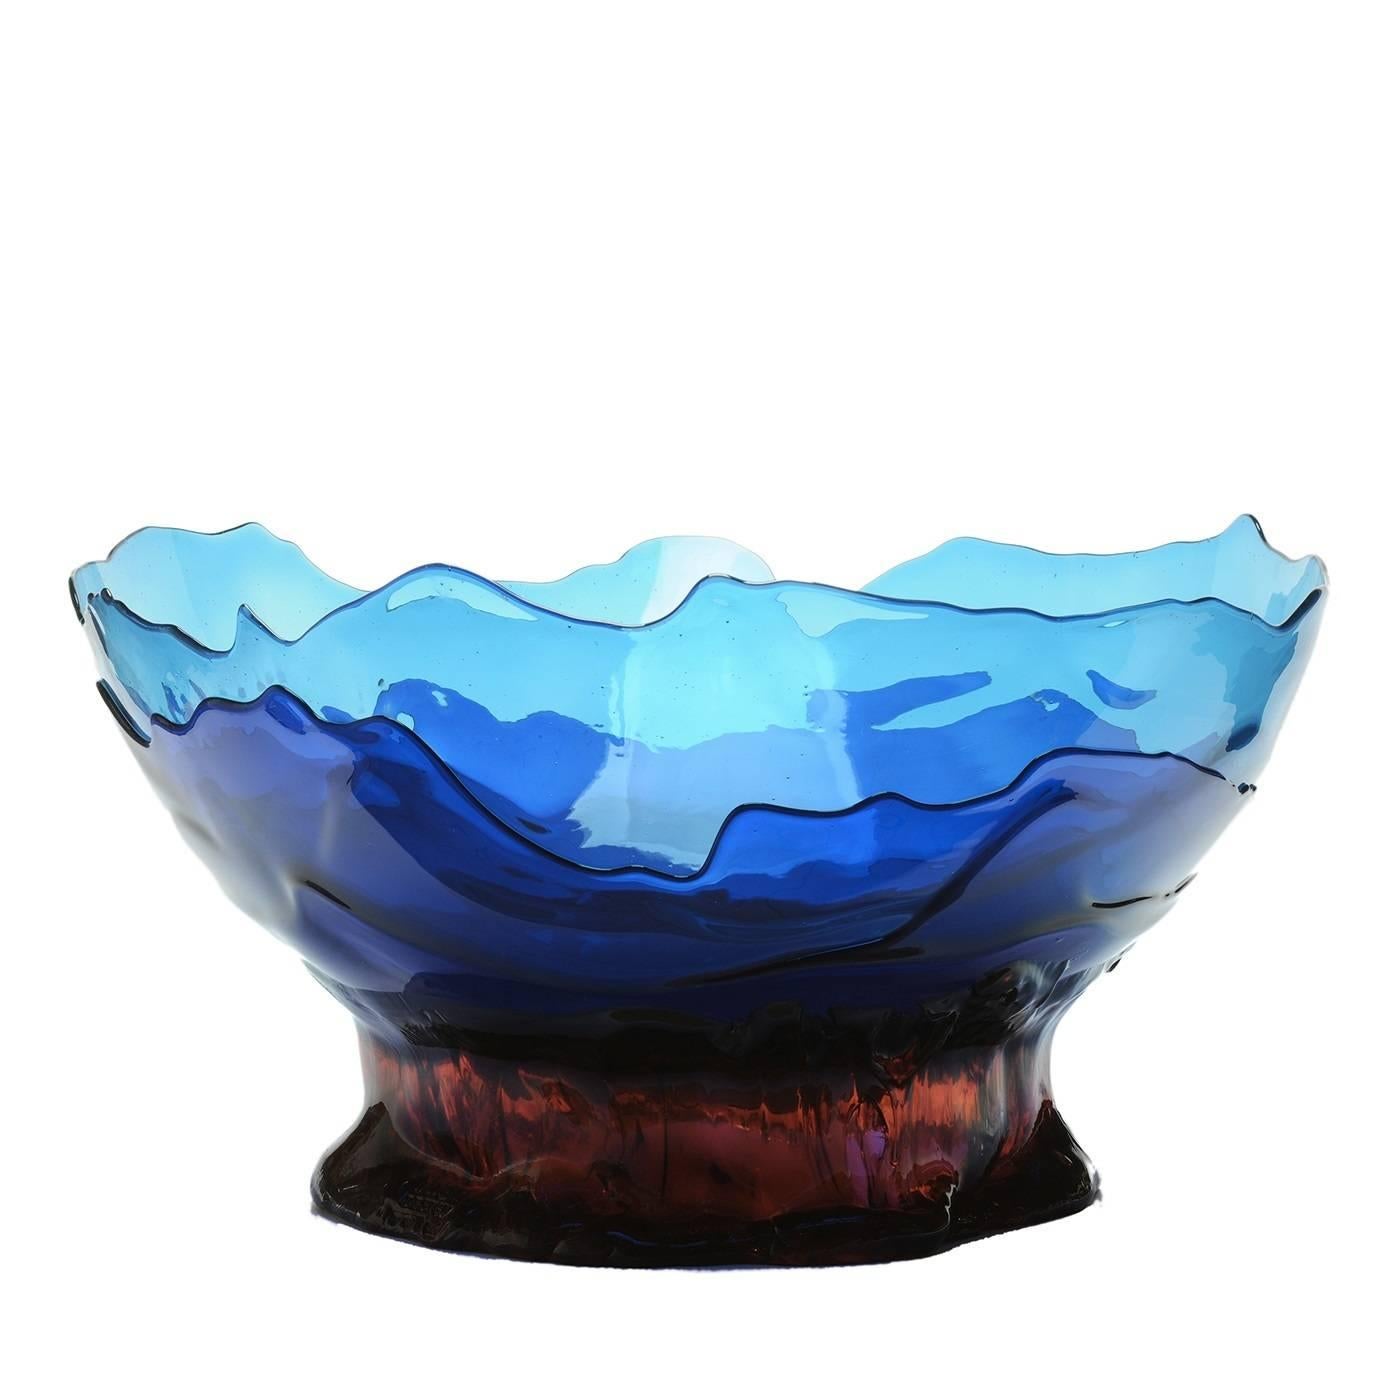 Part of the Big Collina Extracolor series designed by Gaetano Pesce in 1995 for the Fish Design collection, this piece is a versatile addition to a contemporary home. Its large bowl, made of several irregular layers of blue soft resin, can display